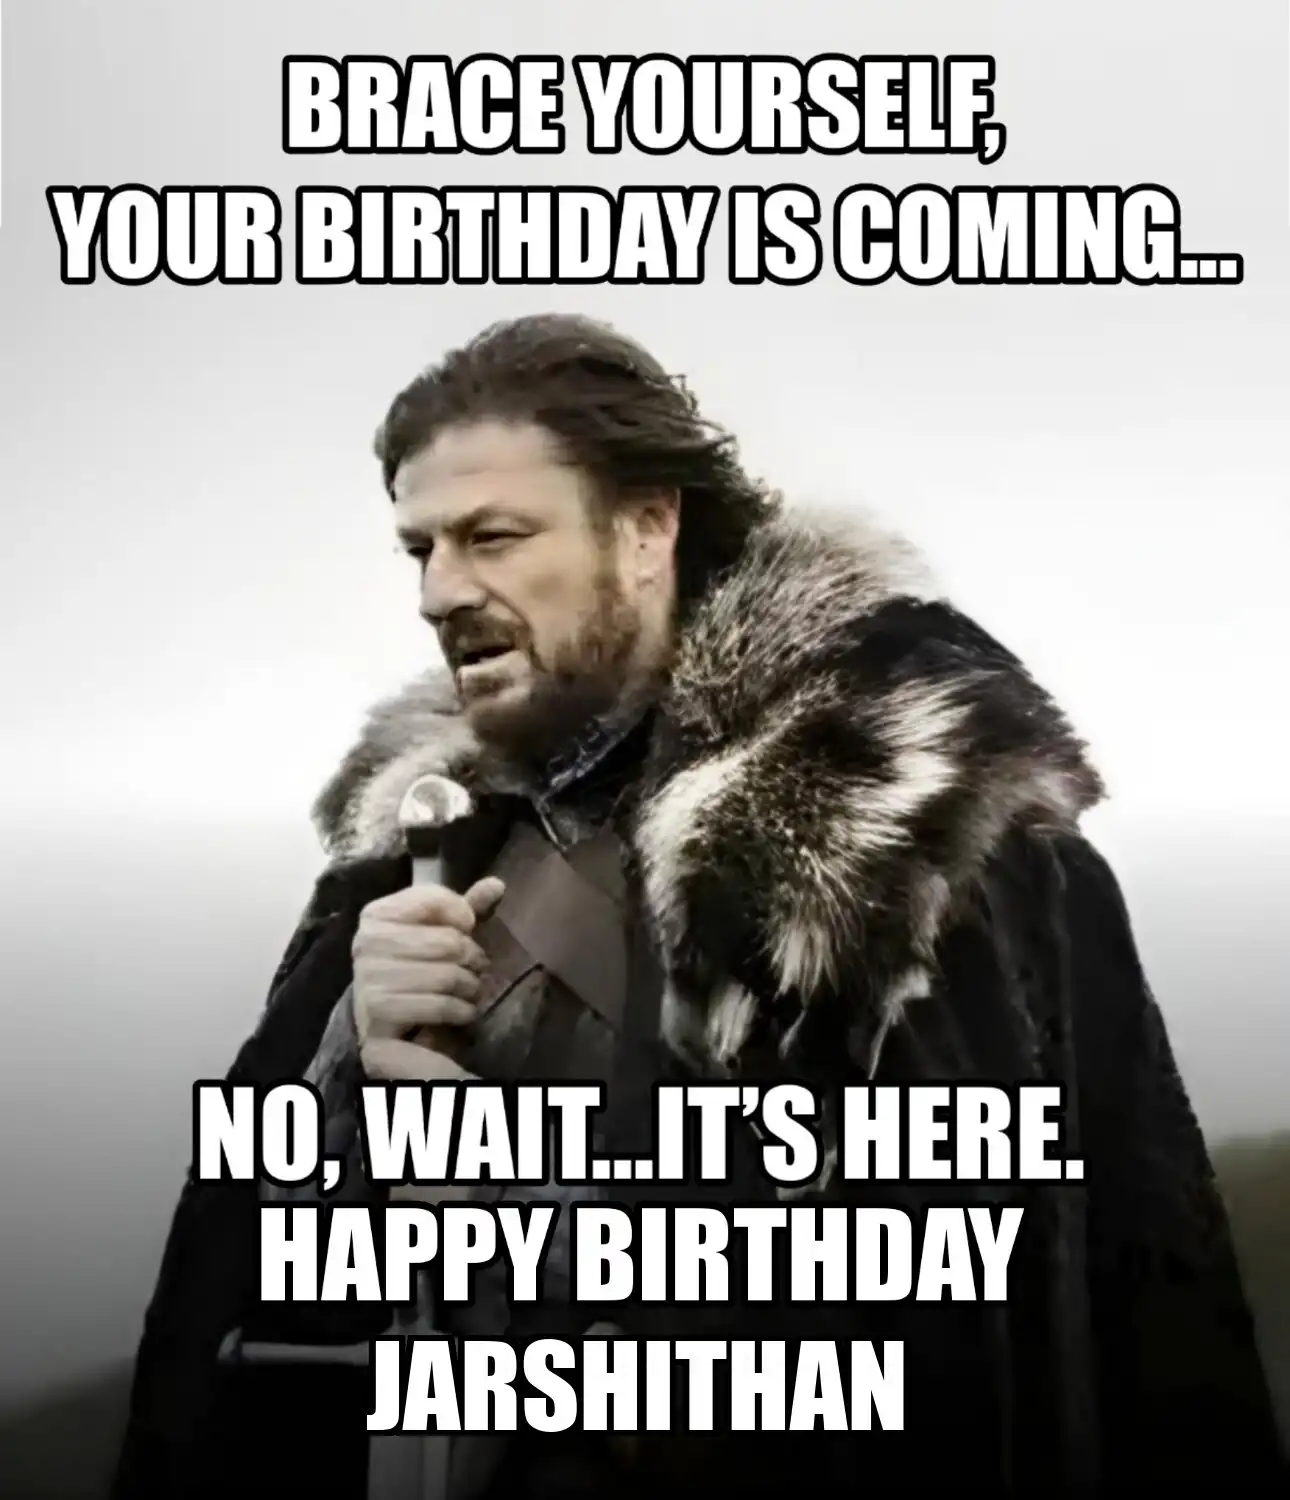 Happy Birthday Jarshithan Brace Yourself Your Birthday Is Coming Meme